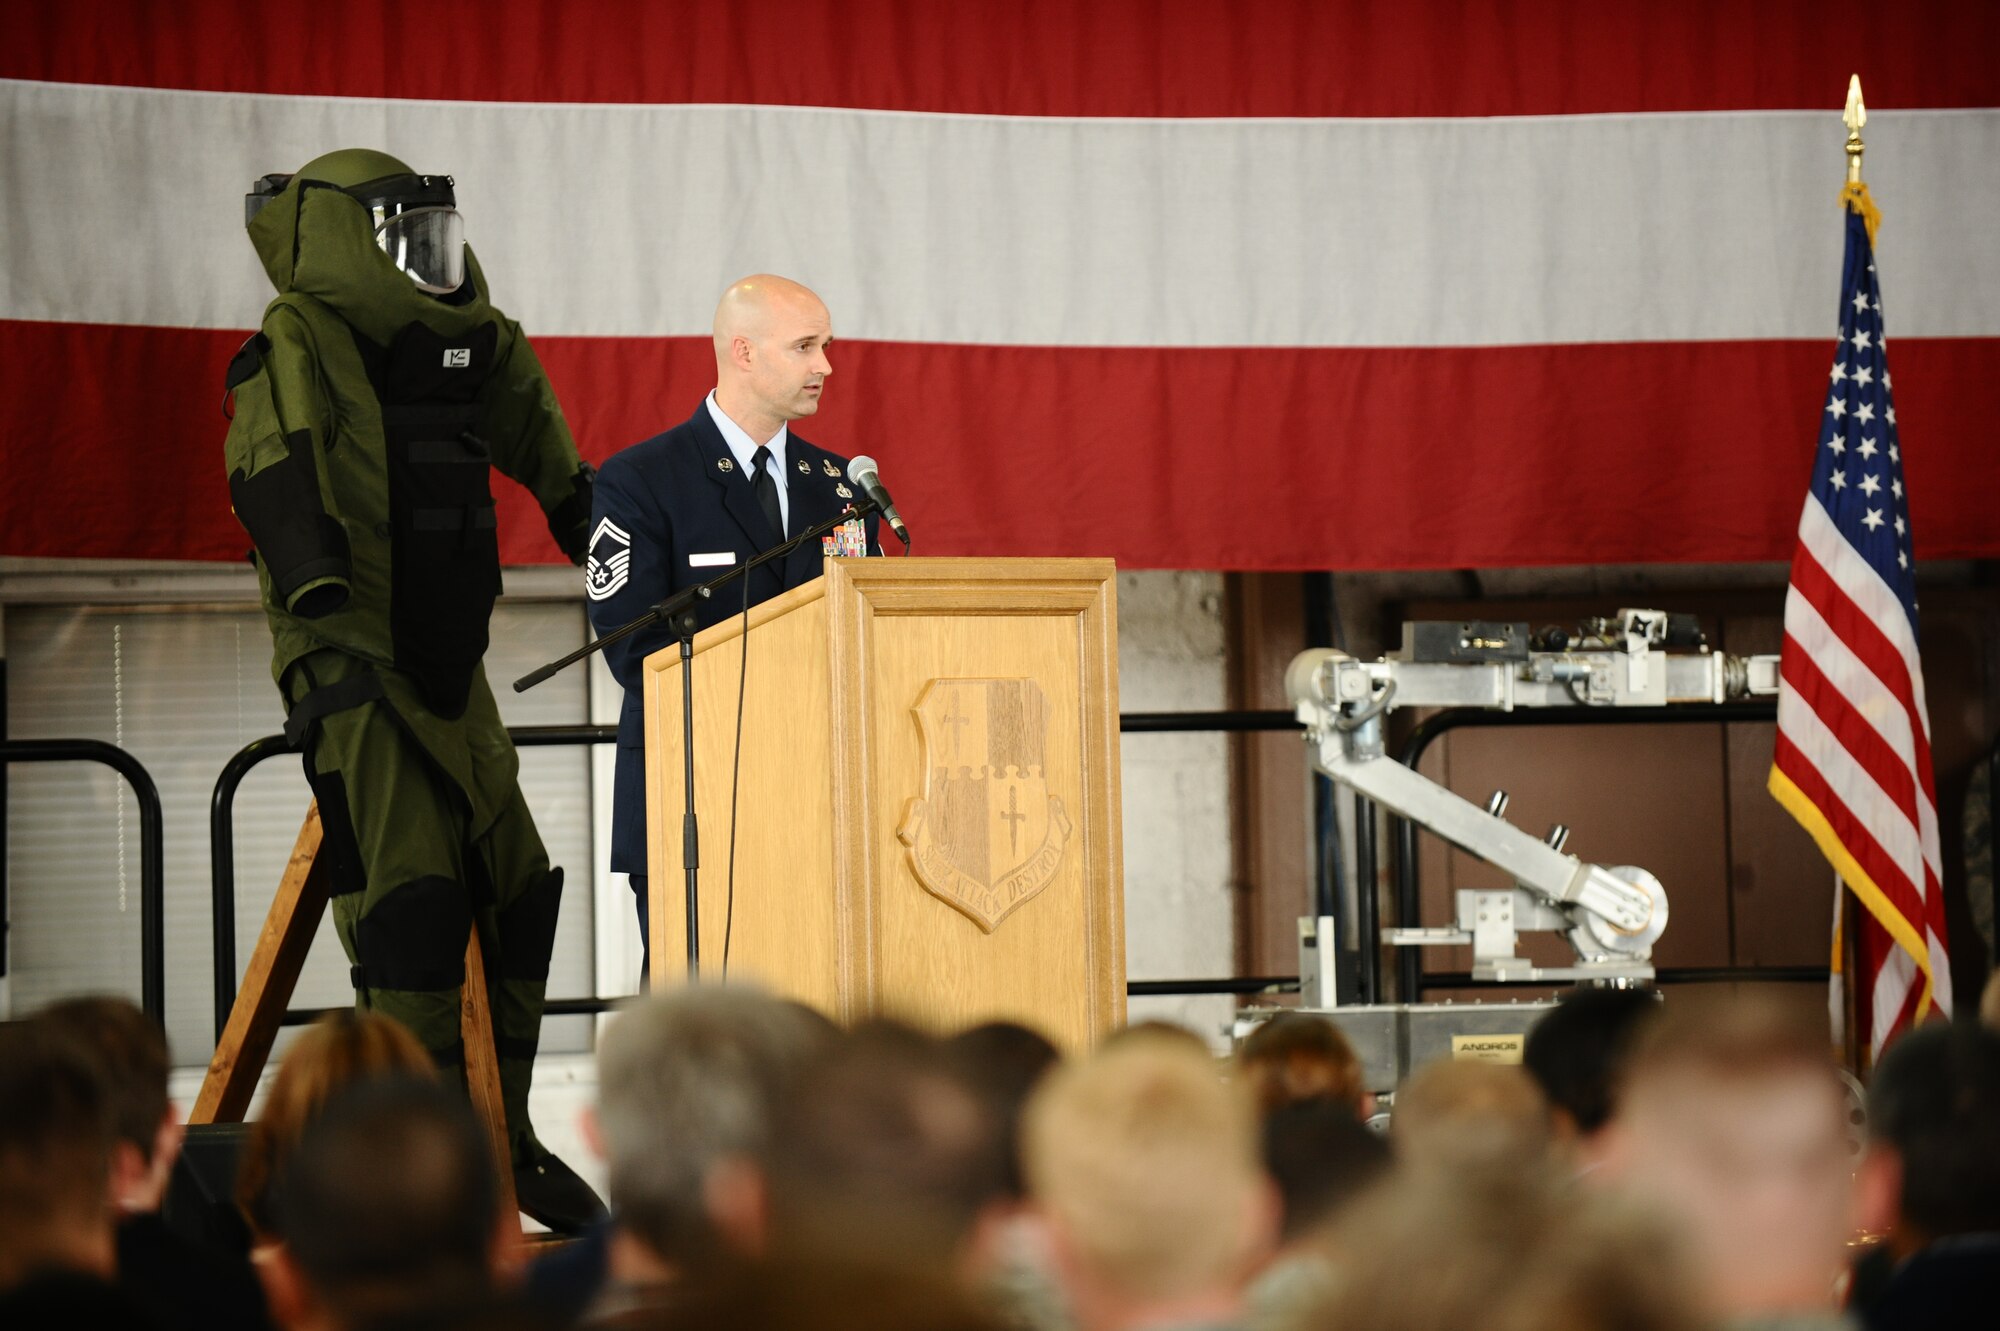 SPANGDAHLEM AIR BASE, Germany – Senior Master Sgt. Neil Jones, 52nd Civil Engineer Squadron Explosive Ordnance Disposal Flight, speaks during the memorial service for Staff Sgt. Joseph J. Hamski, 52nd CES EOD Flight, held here June 16. Sergeant Hamski was killed in action May 26, 2011, in Shorabak, Afghanistan, while responding to a known enemy weapons cache. (U.S. Air Force photo/Senior Airman Nathanael Callon)